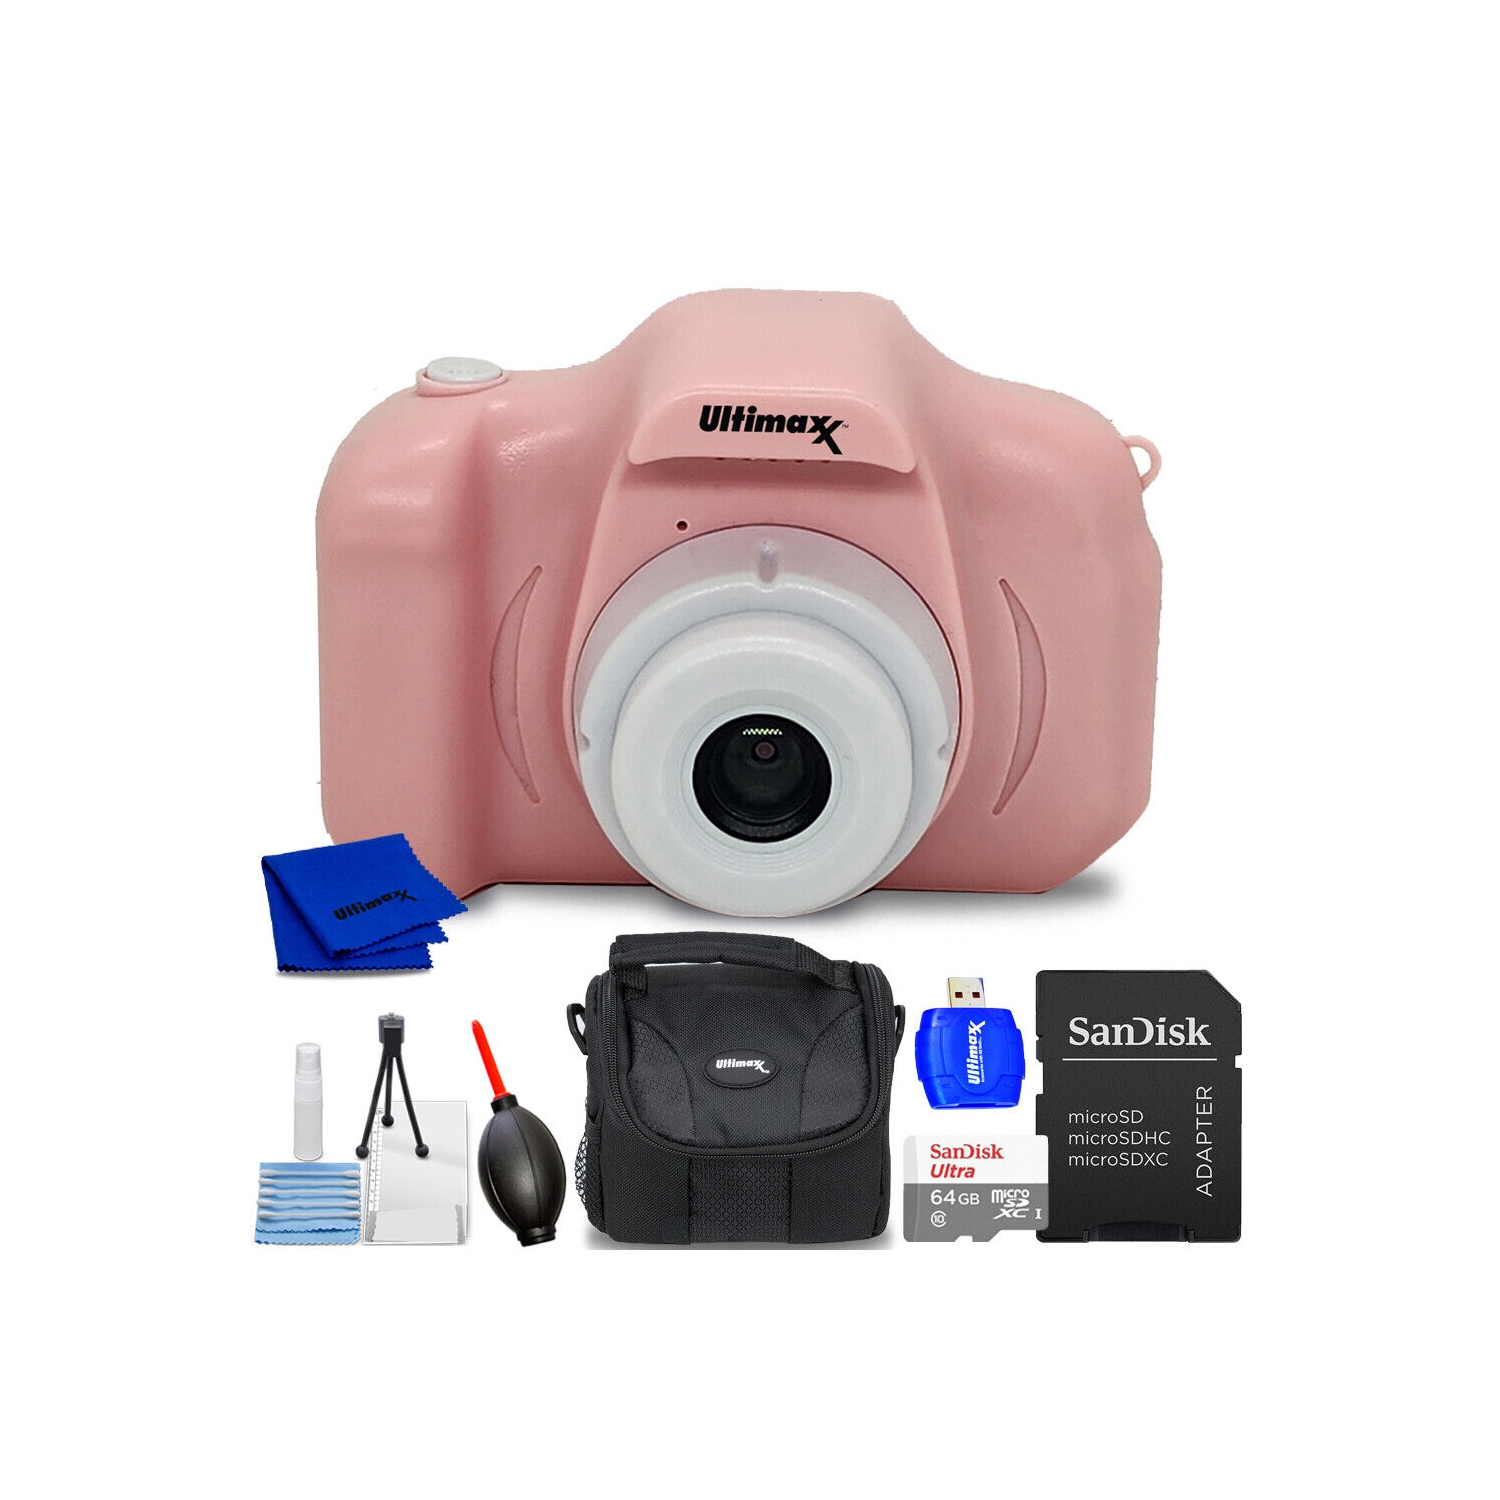 Ultimaxx Digital Video Recorder Camera (Pink) Kids Teens ages 8-12 Beginners with Games 32GB Micro SD Holiday Christmas Gift Bundle